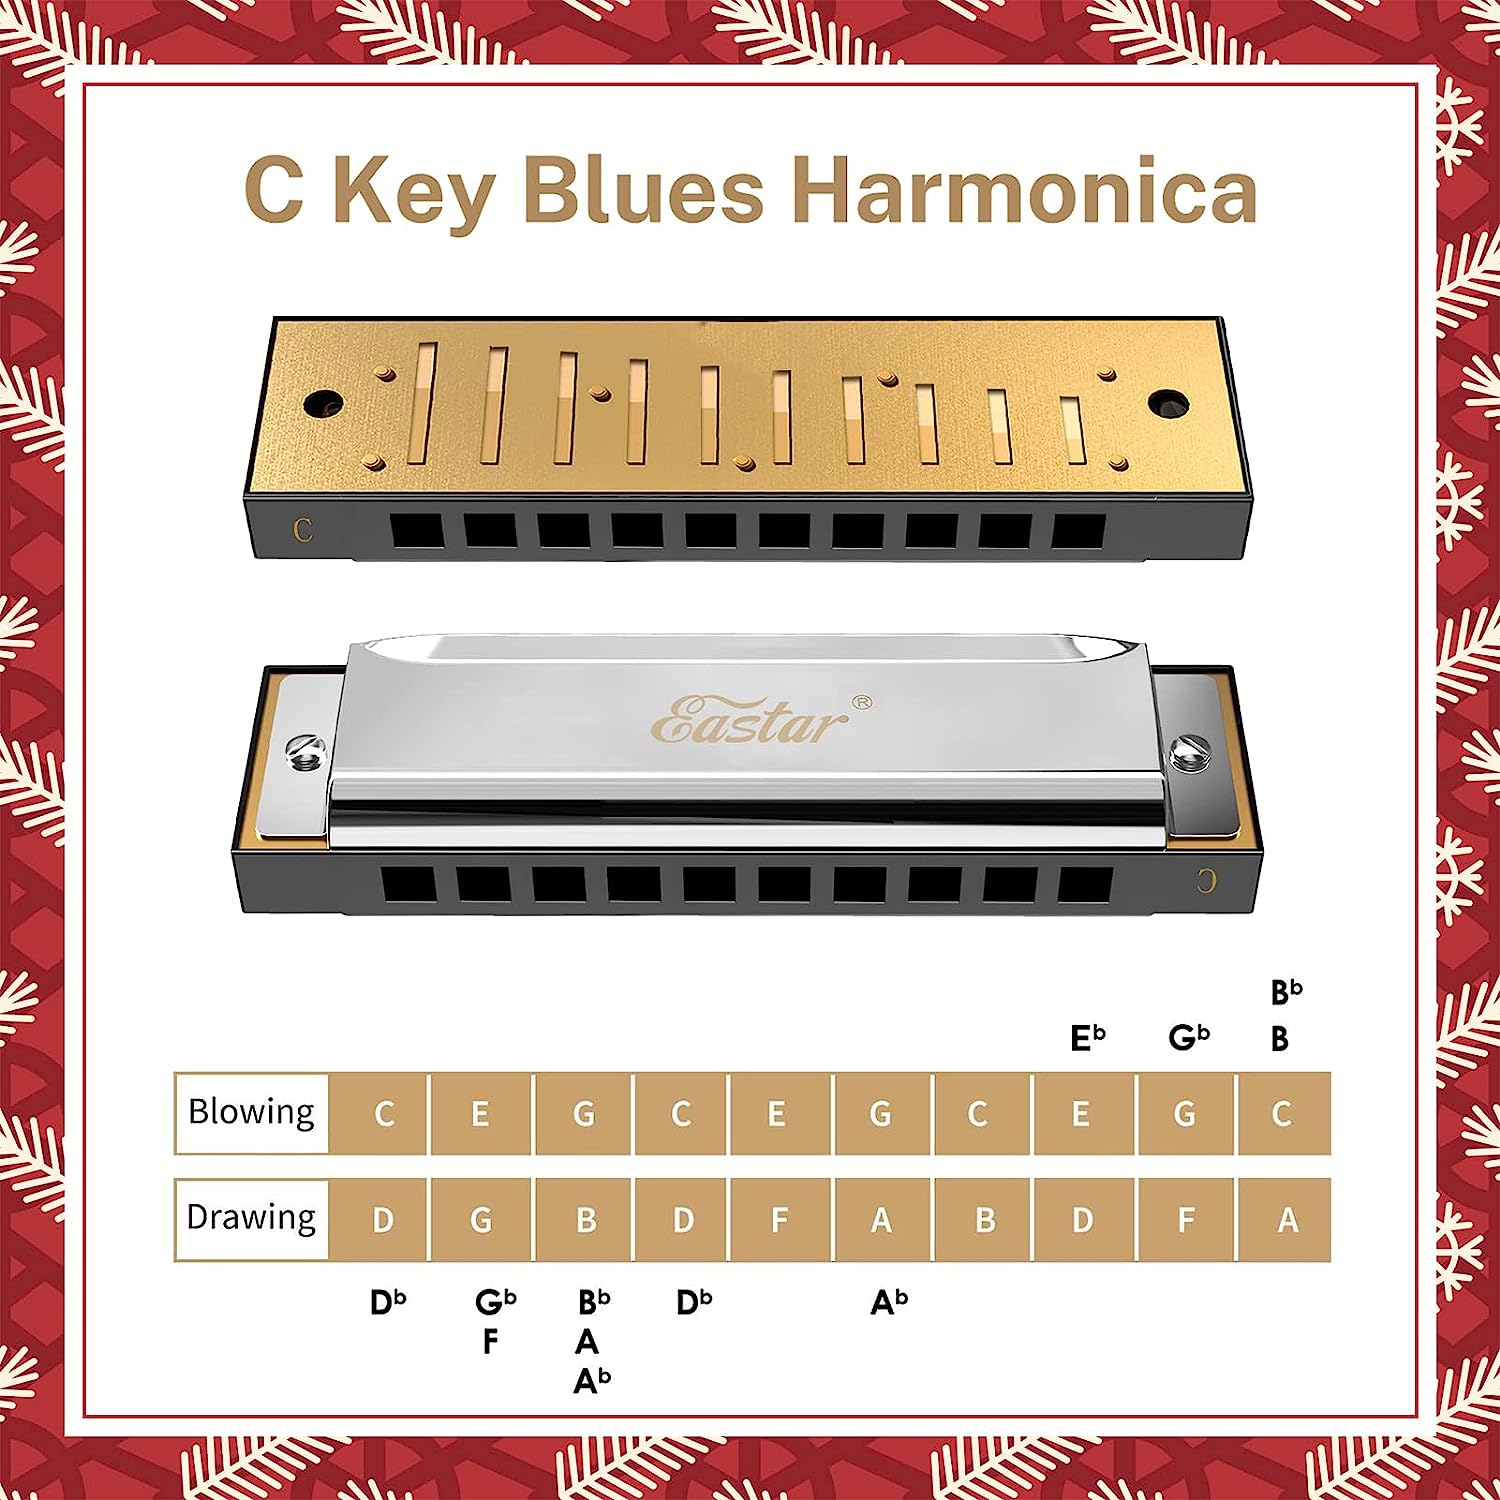 Eastar Major Blues Harmonica Sets 7 Keys Diatonic Harmonica in Key of C D E F G A Bb for Adults, Beginners, Students, and Kids.  7-Pack with Carrying Case & Cleaning Cloth.  Nickel